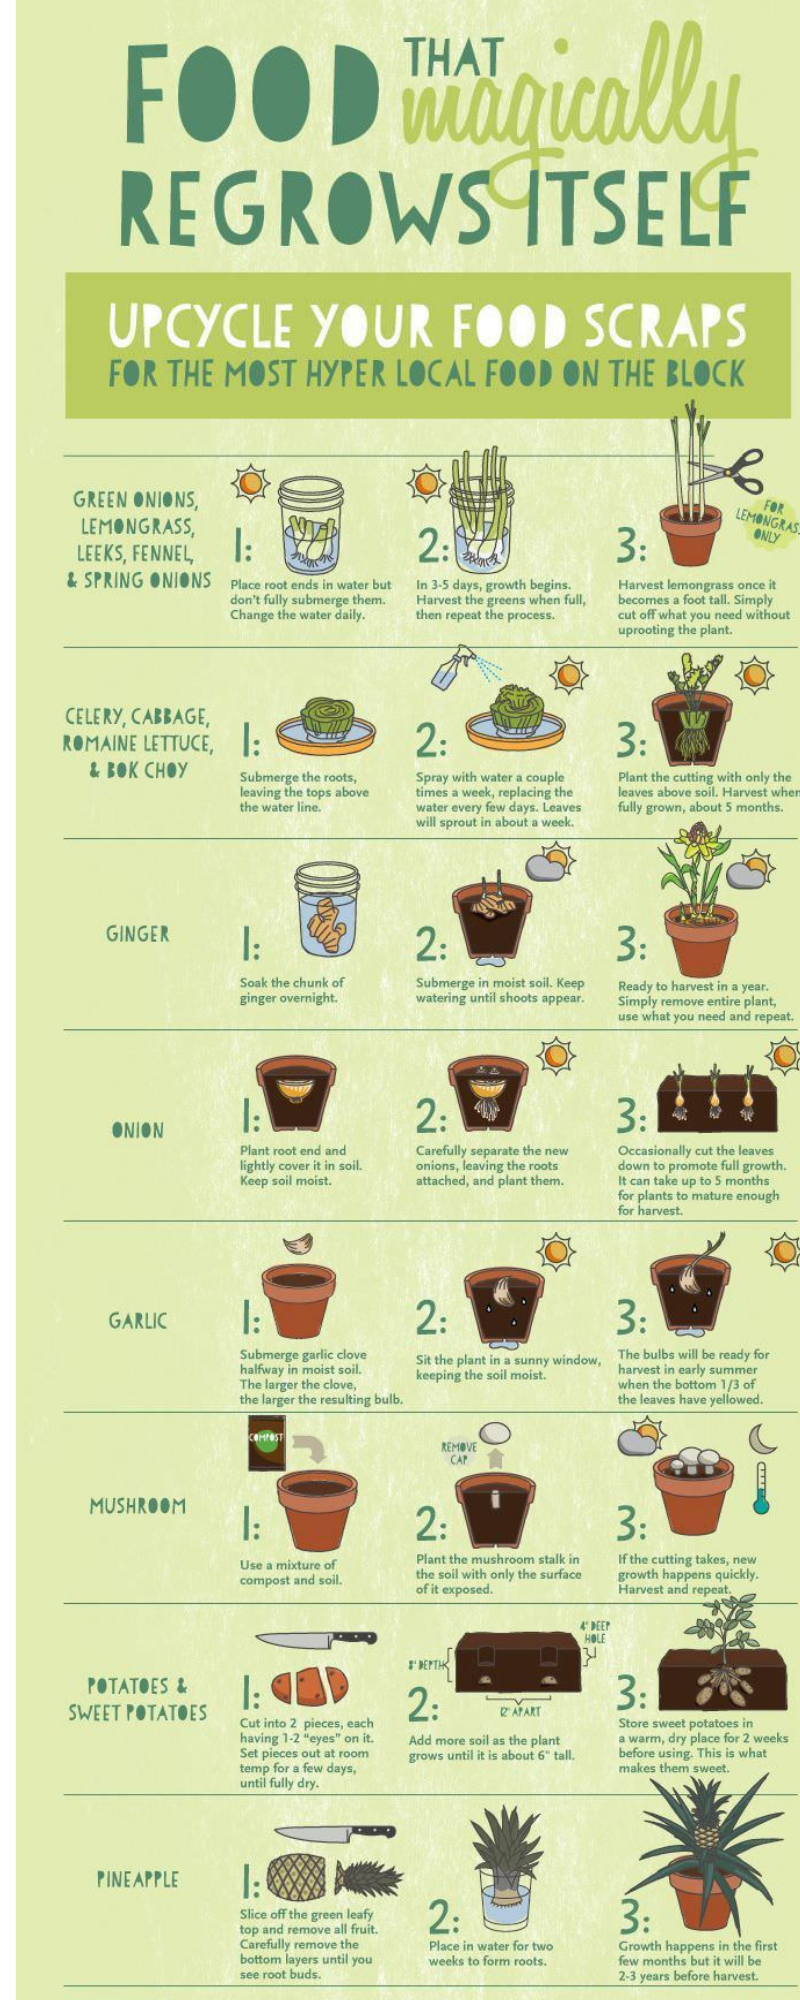 You Can Recycle and Regrow These Food Scraps - Infographic